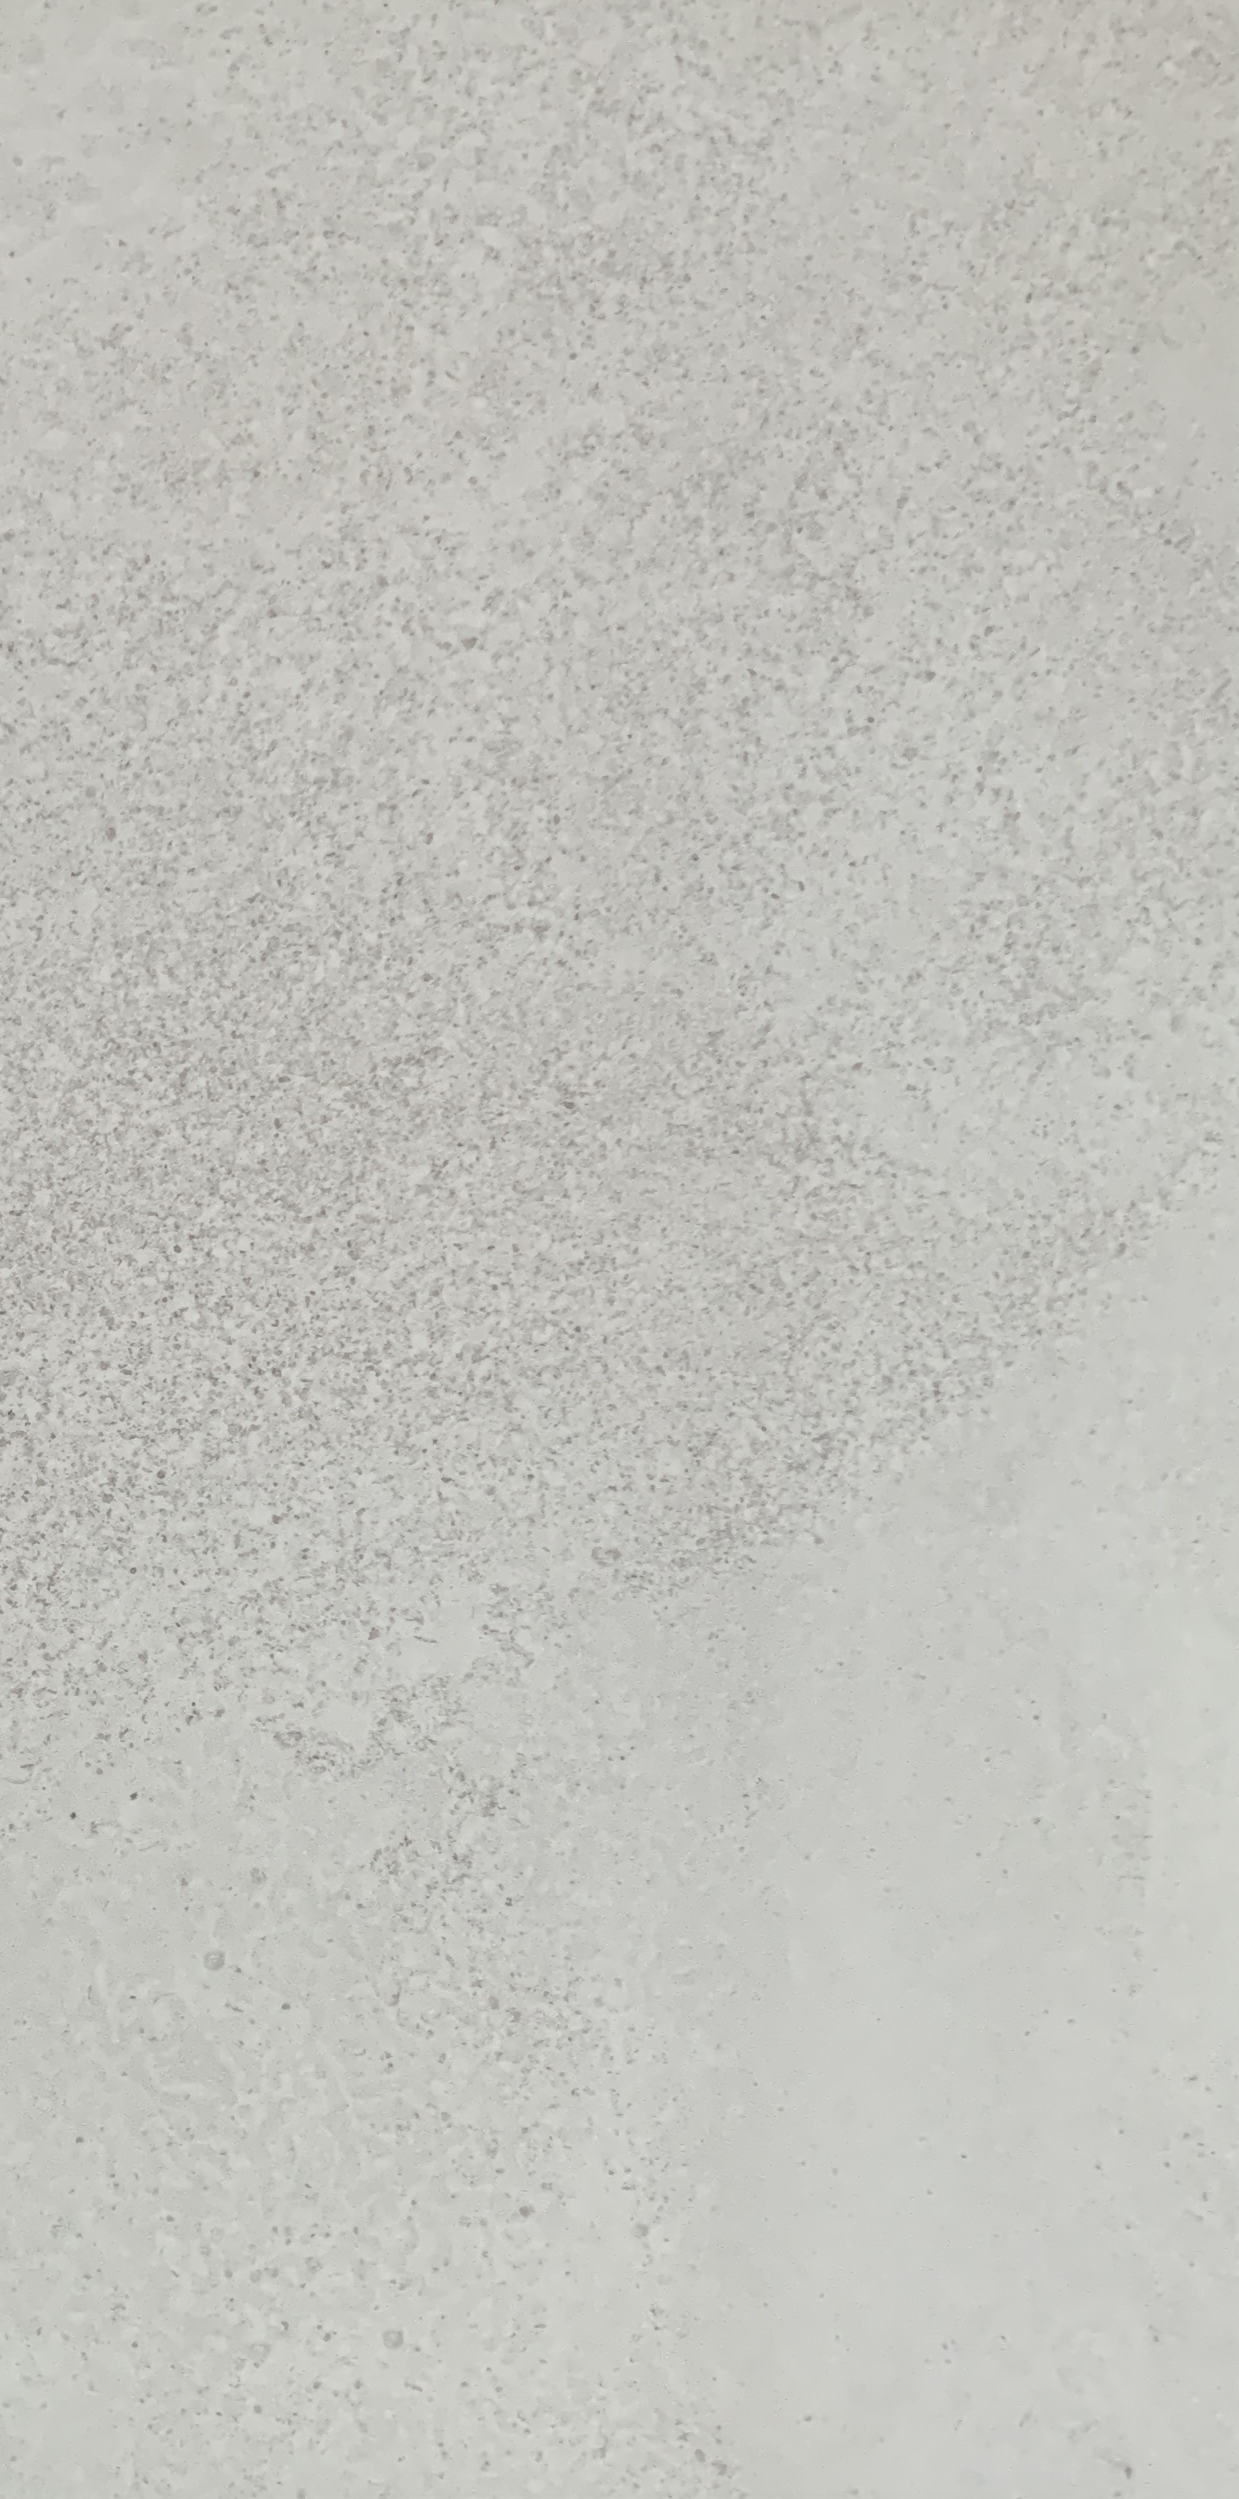 FRENCH QTR WHITE | French Qtr White Rectified Glazed Porcelain. Tile Samples Sydney